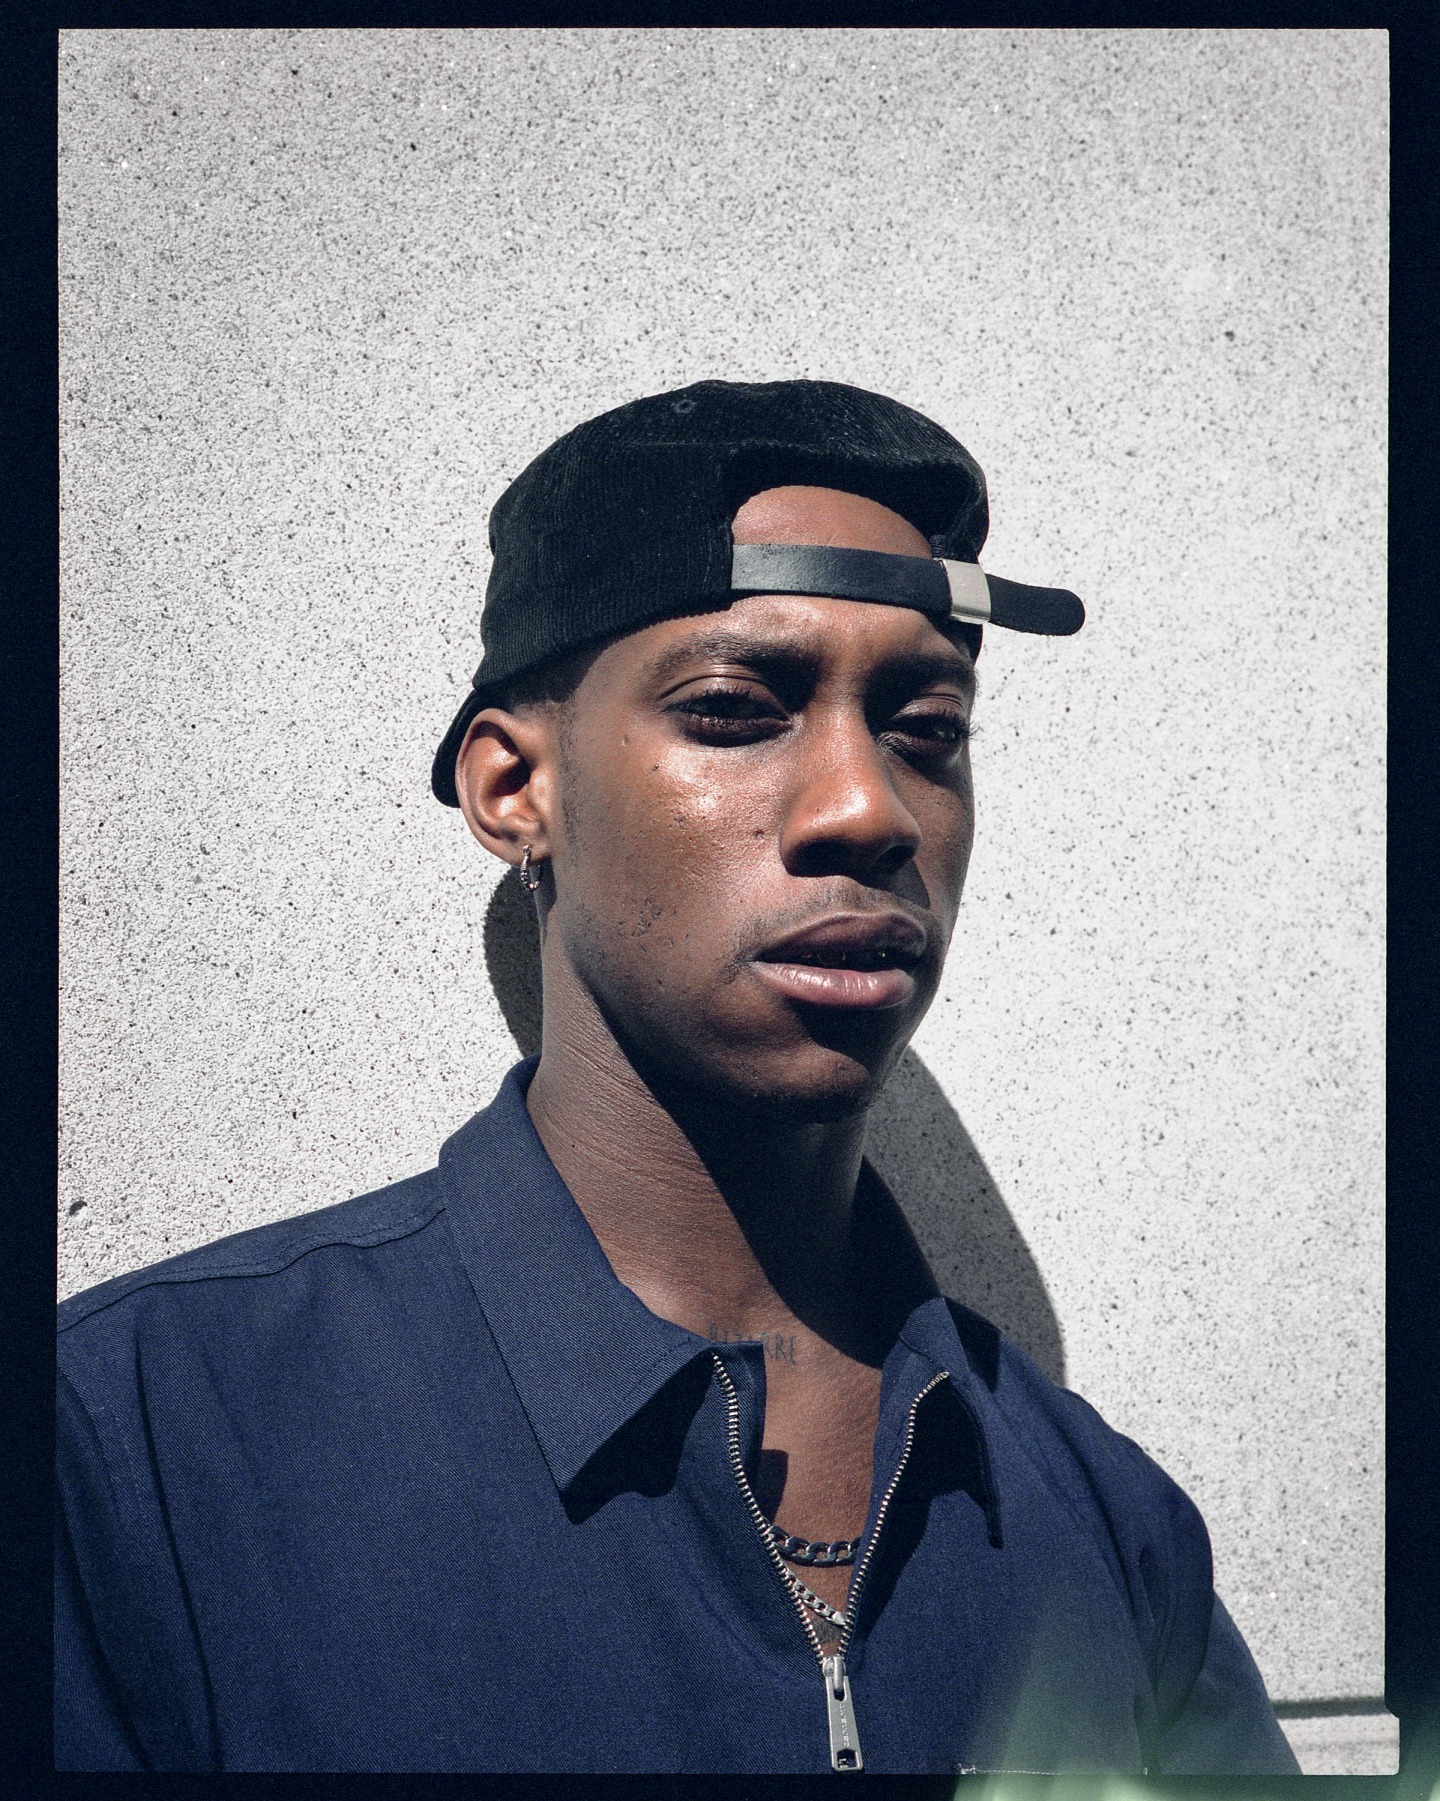 Octavian found his sound, and U.K. rap is better for it